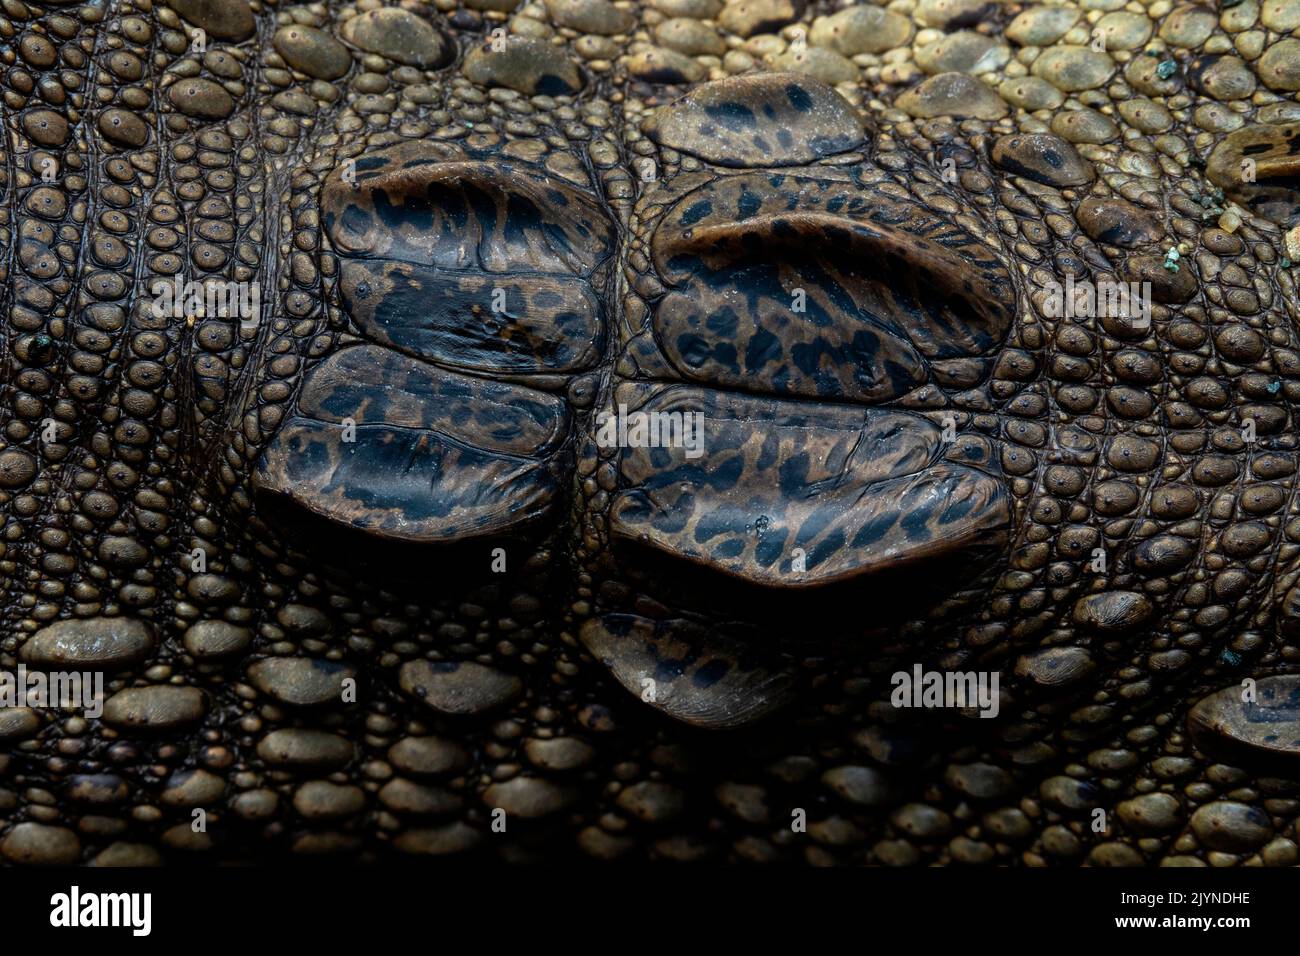 Central american alligator (Crocodylus acutus) detail of cranial roof scales, Carate, Osa, Costa Rica Stock Photo